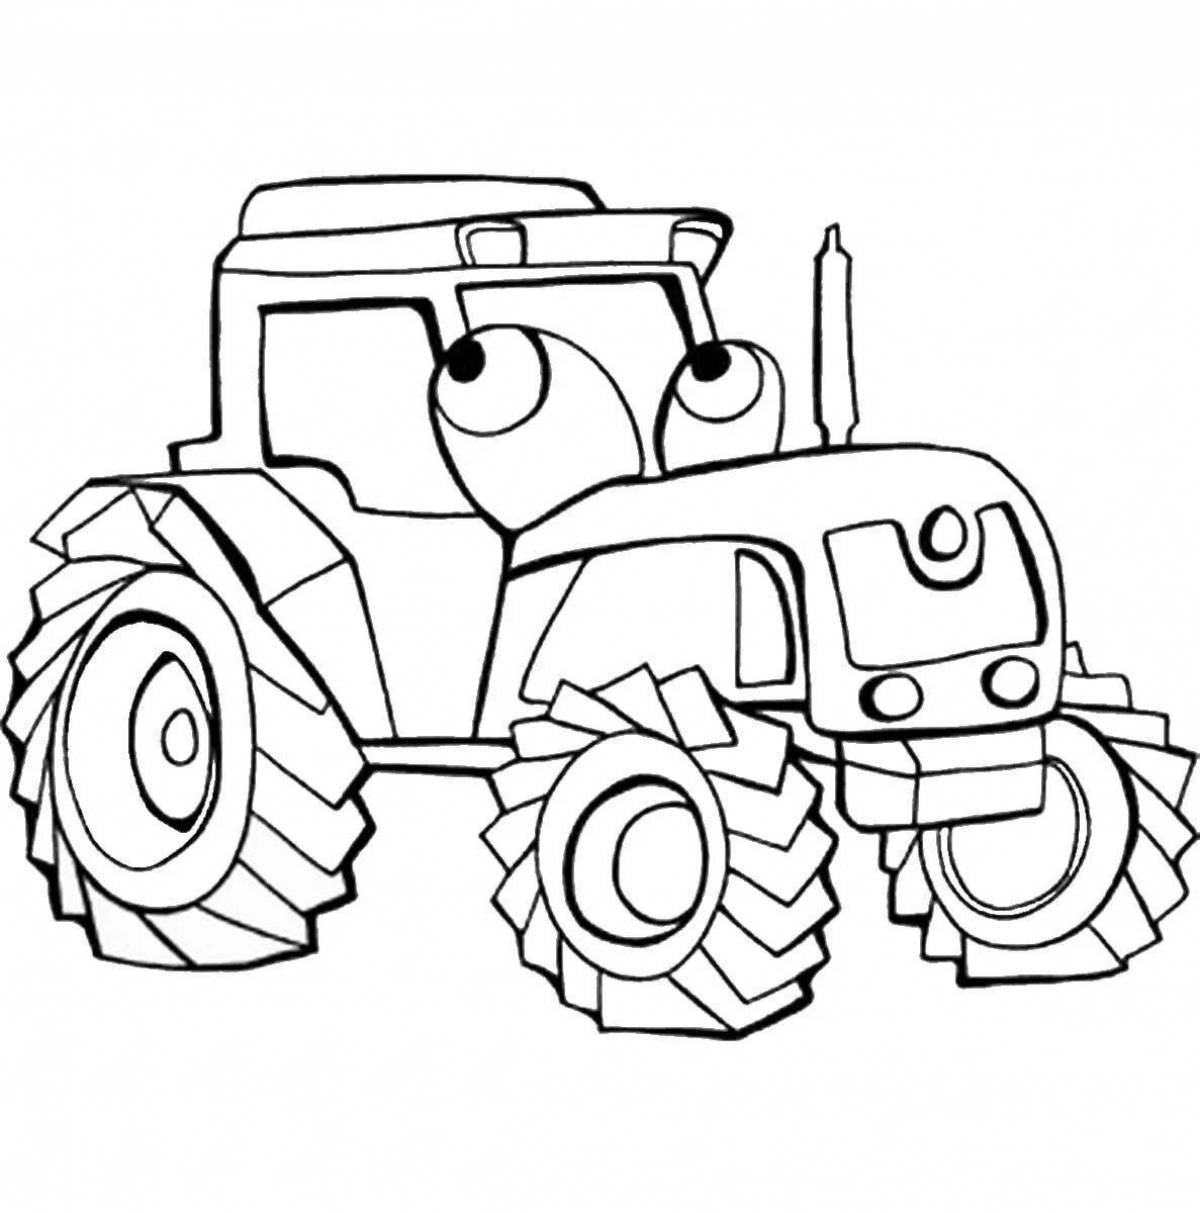 Colorful child tractor coloring page